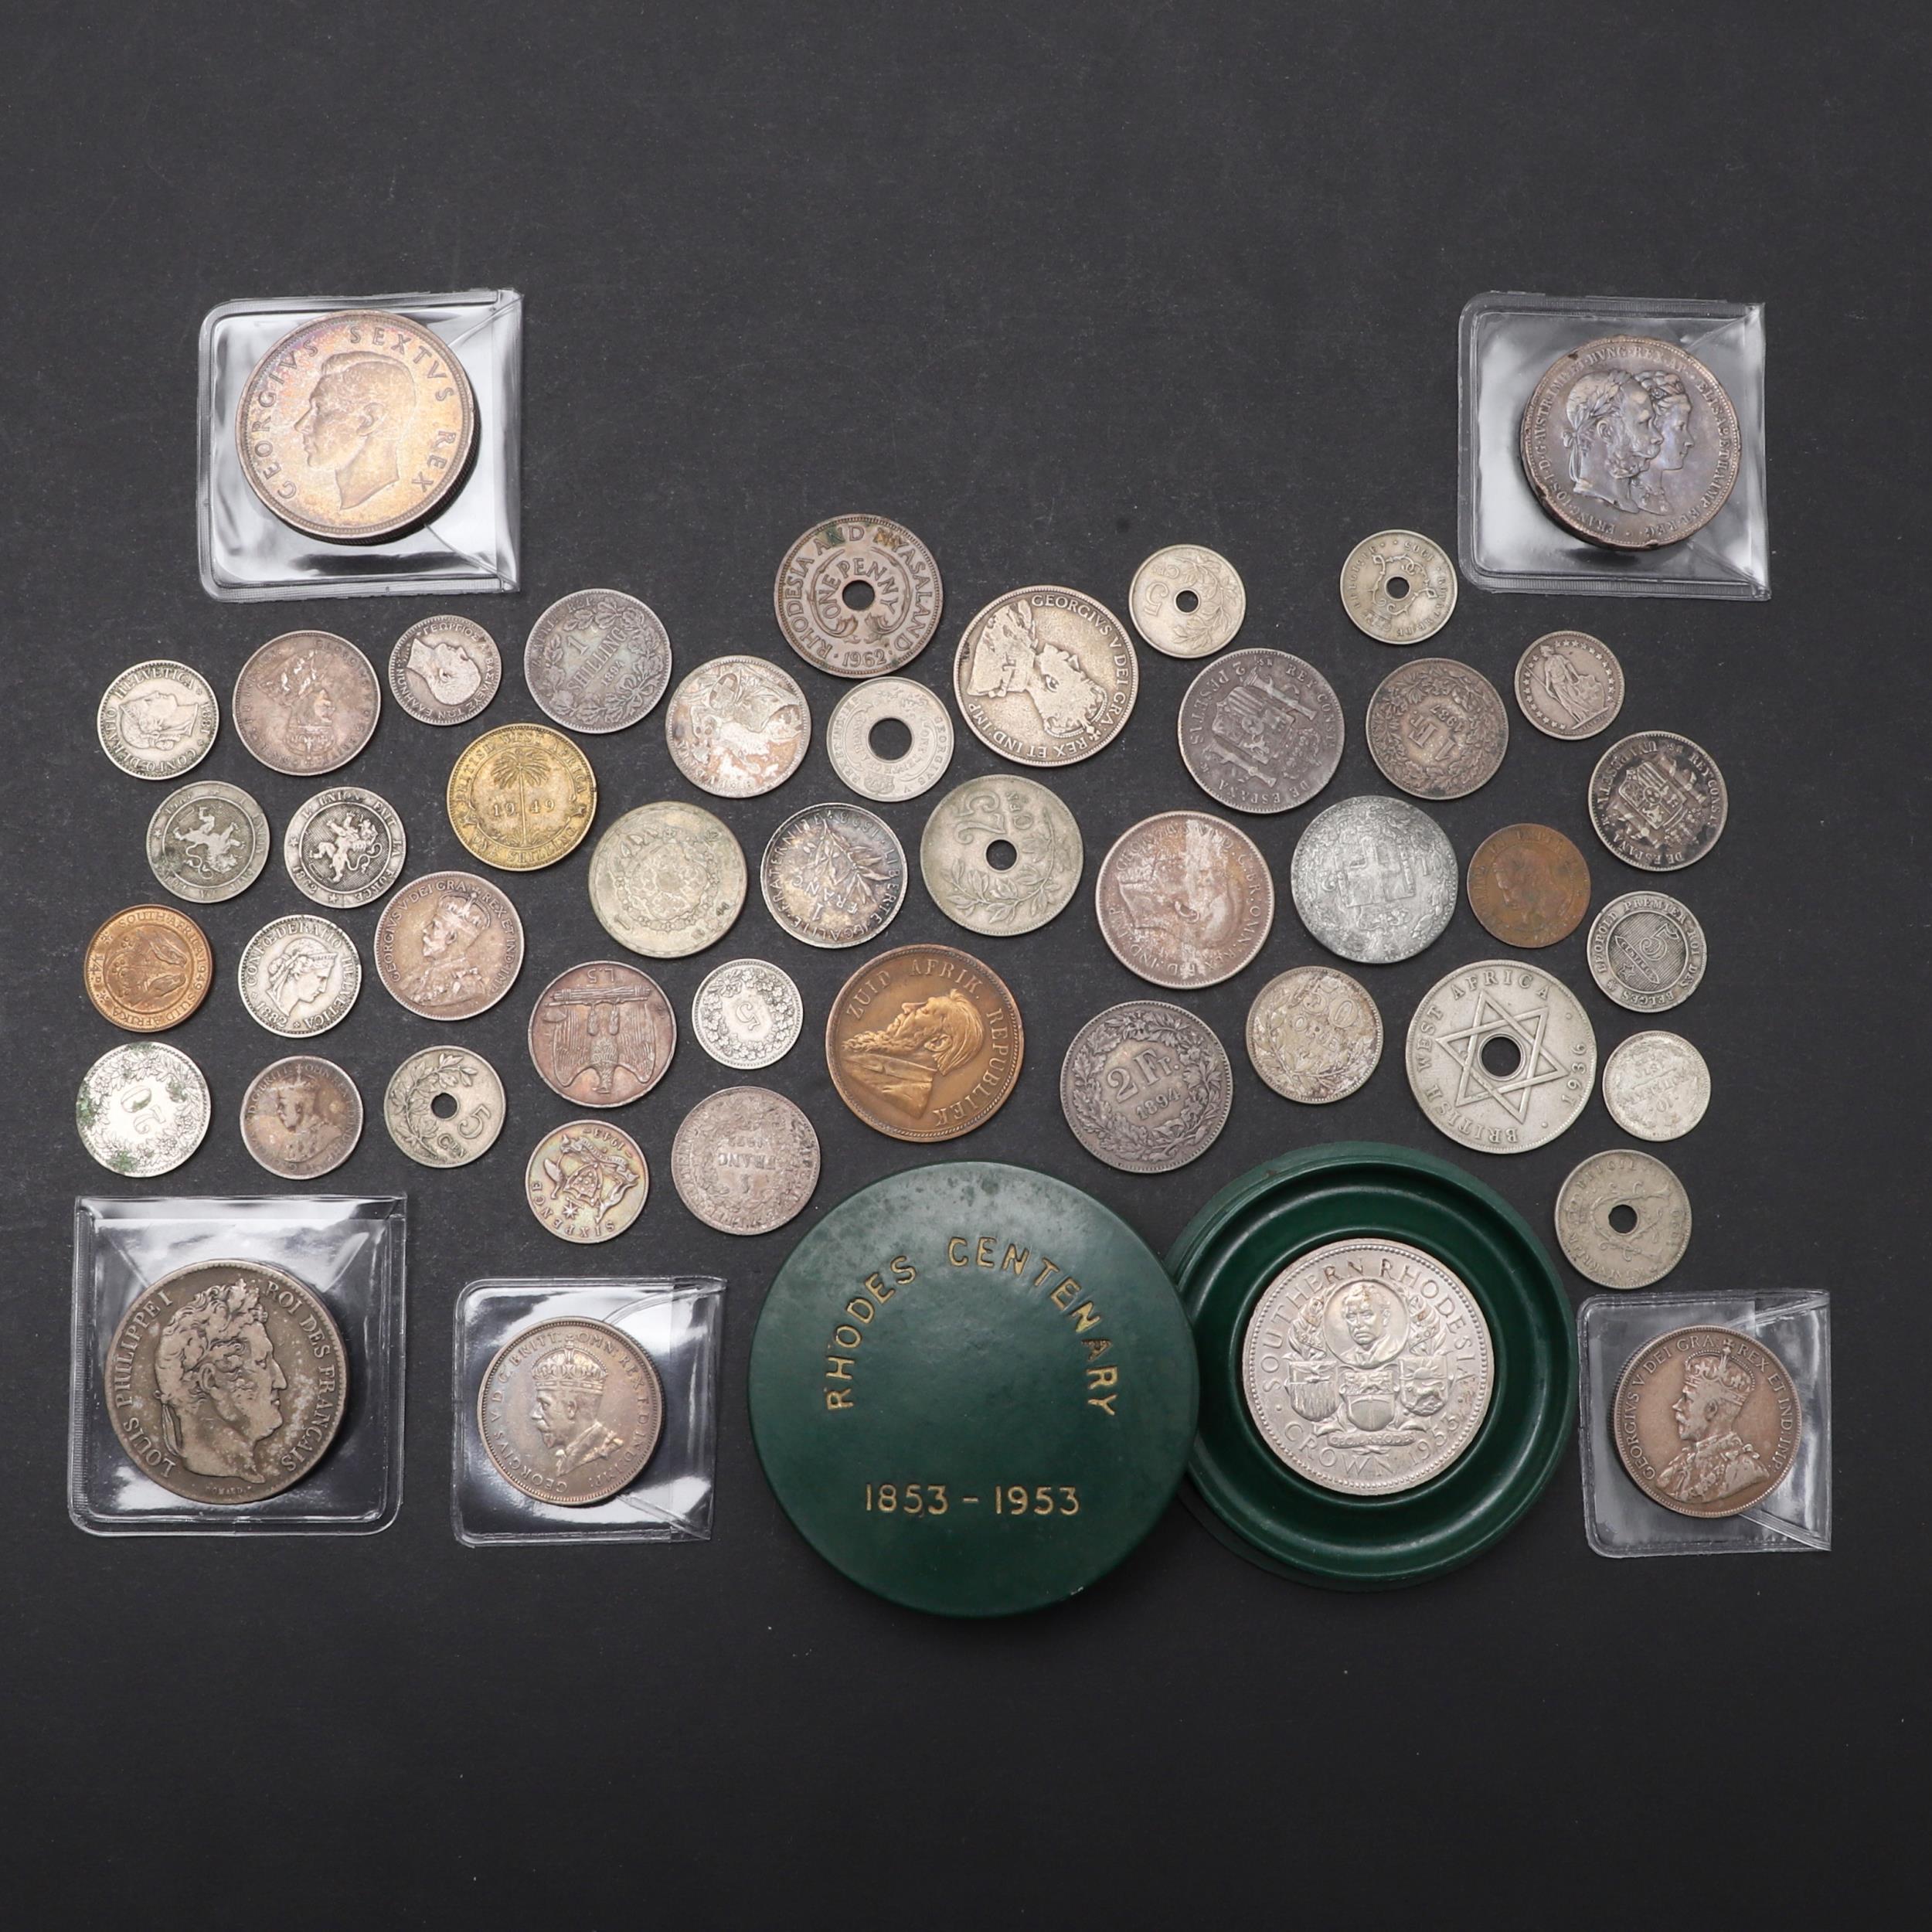 AN INTERESTING COLLECTION OF SOUTH AFRICAN AND OTHER WORLD COINS.